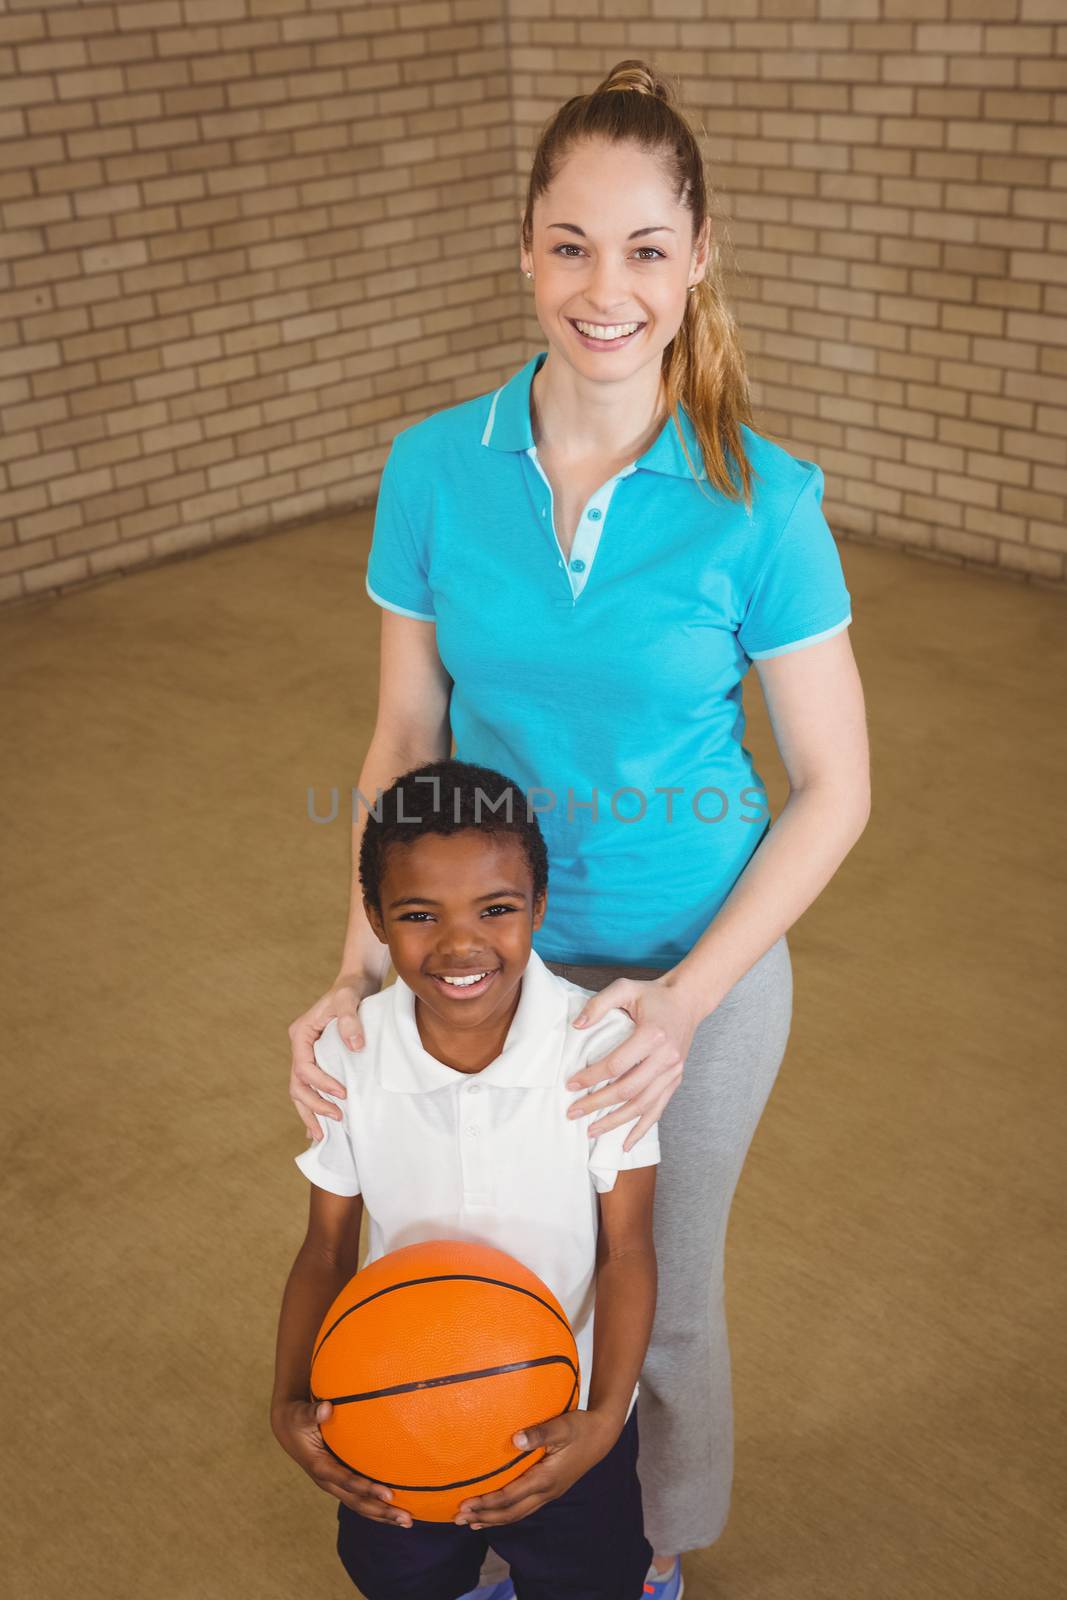 Student holding basketball with teacher at the elementary school